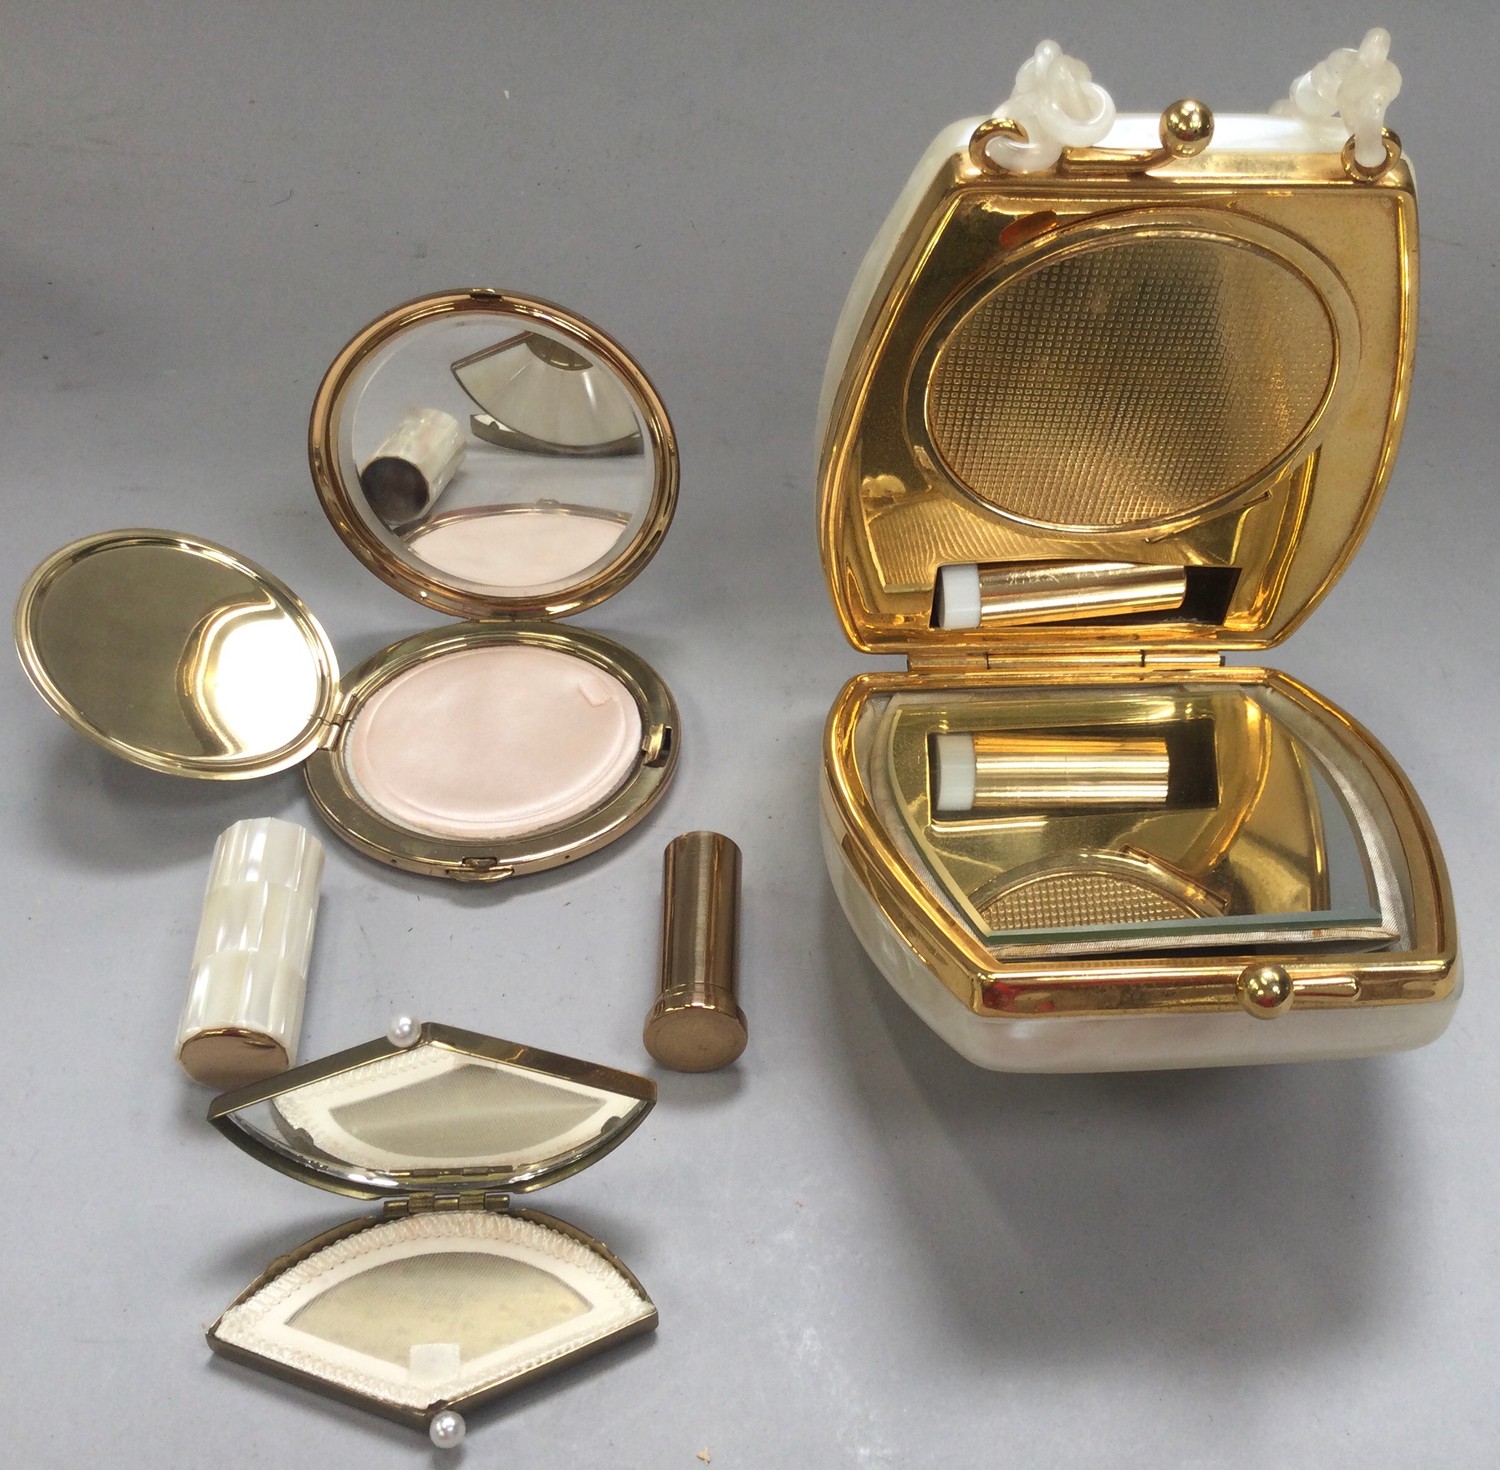 Vintage ladies powder compact and lipstick set with mirror together with another boxed compact and - Image 2 of 2